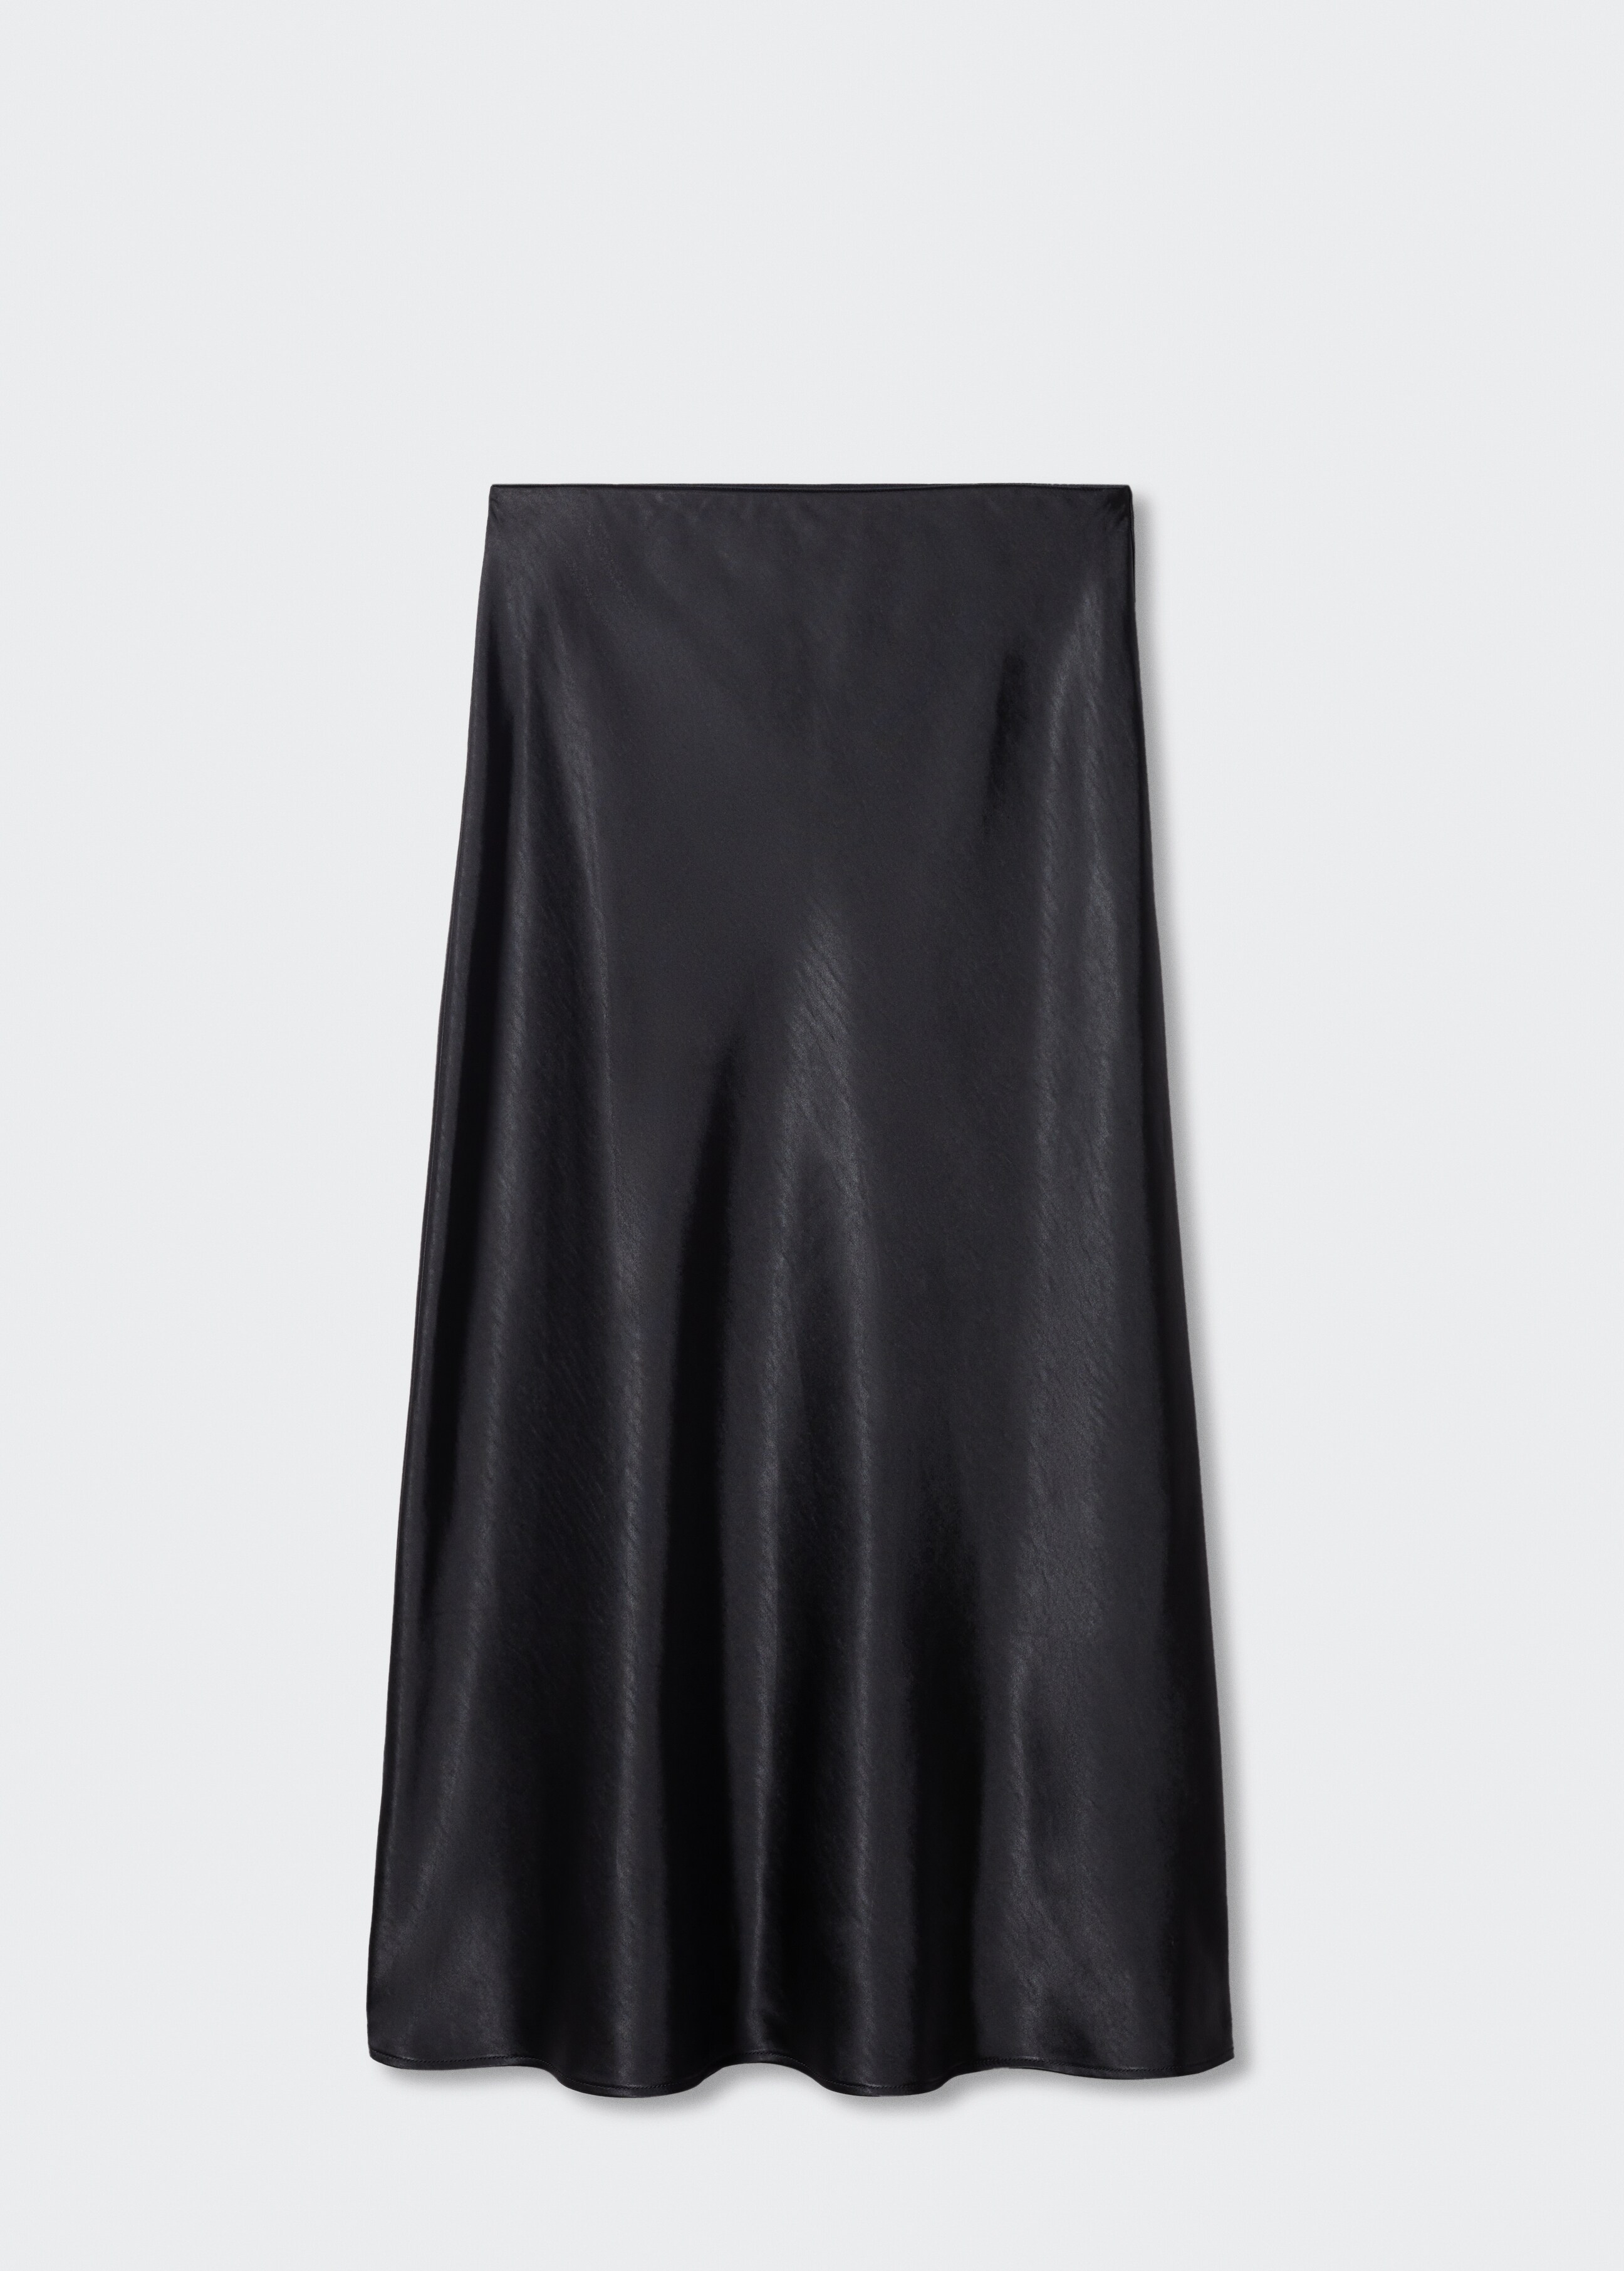 Satin long skirt - Article without model